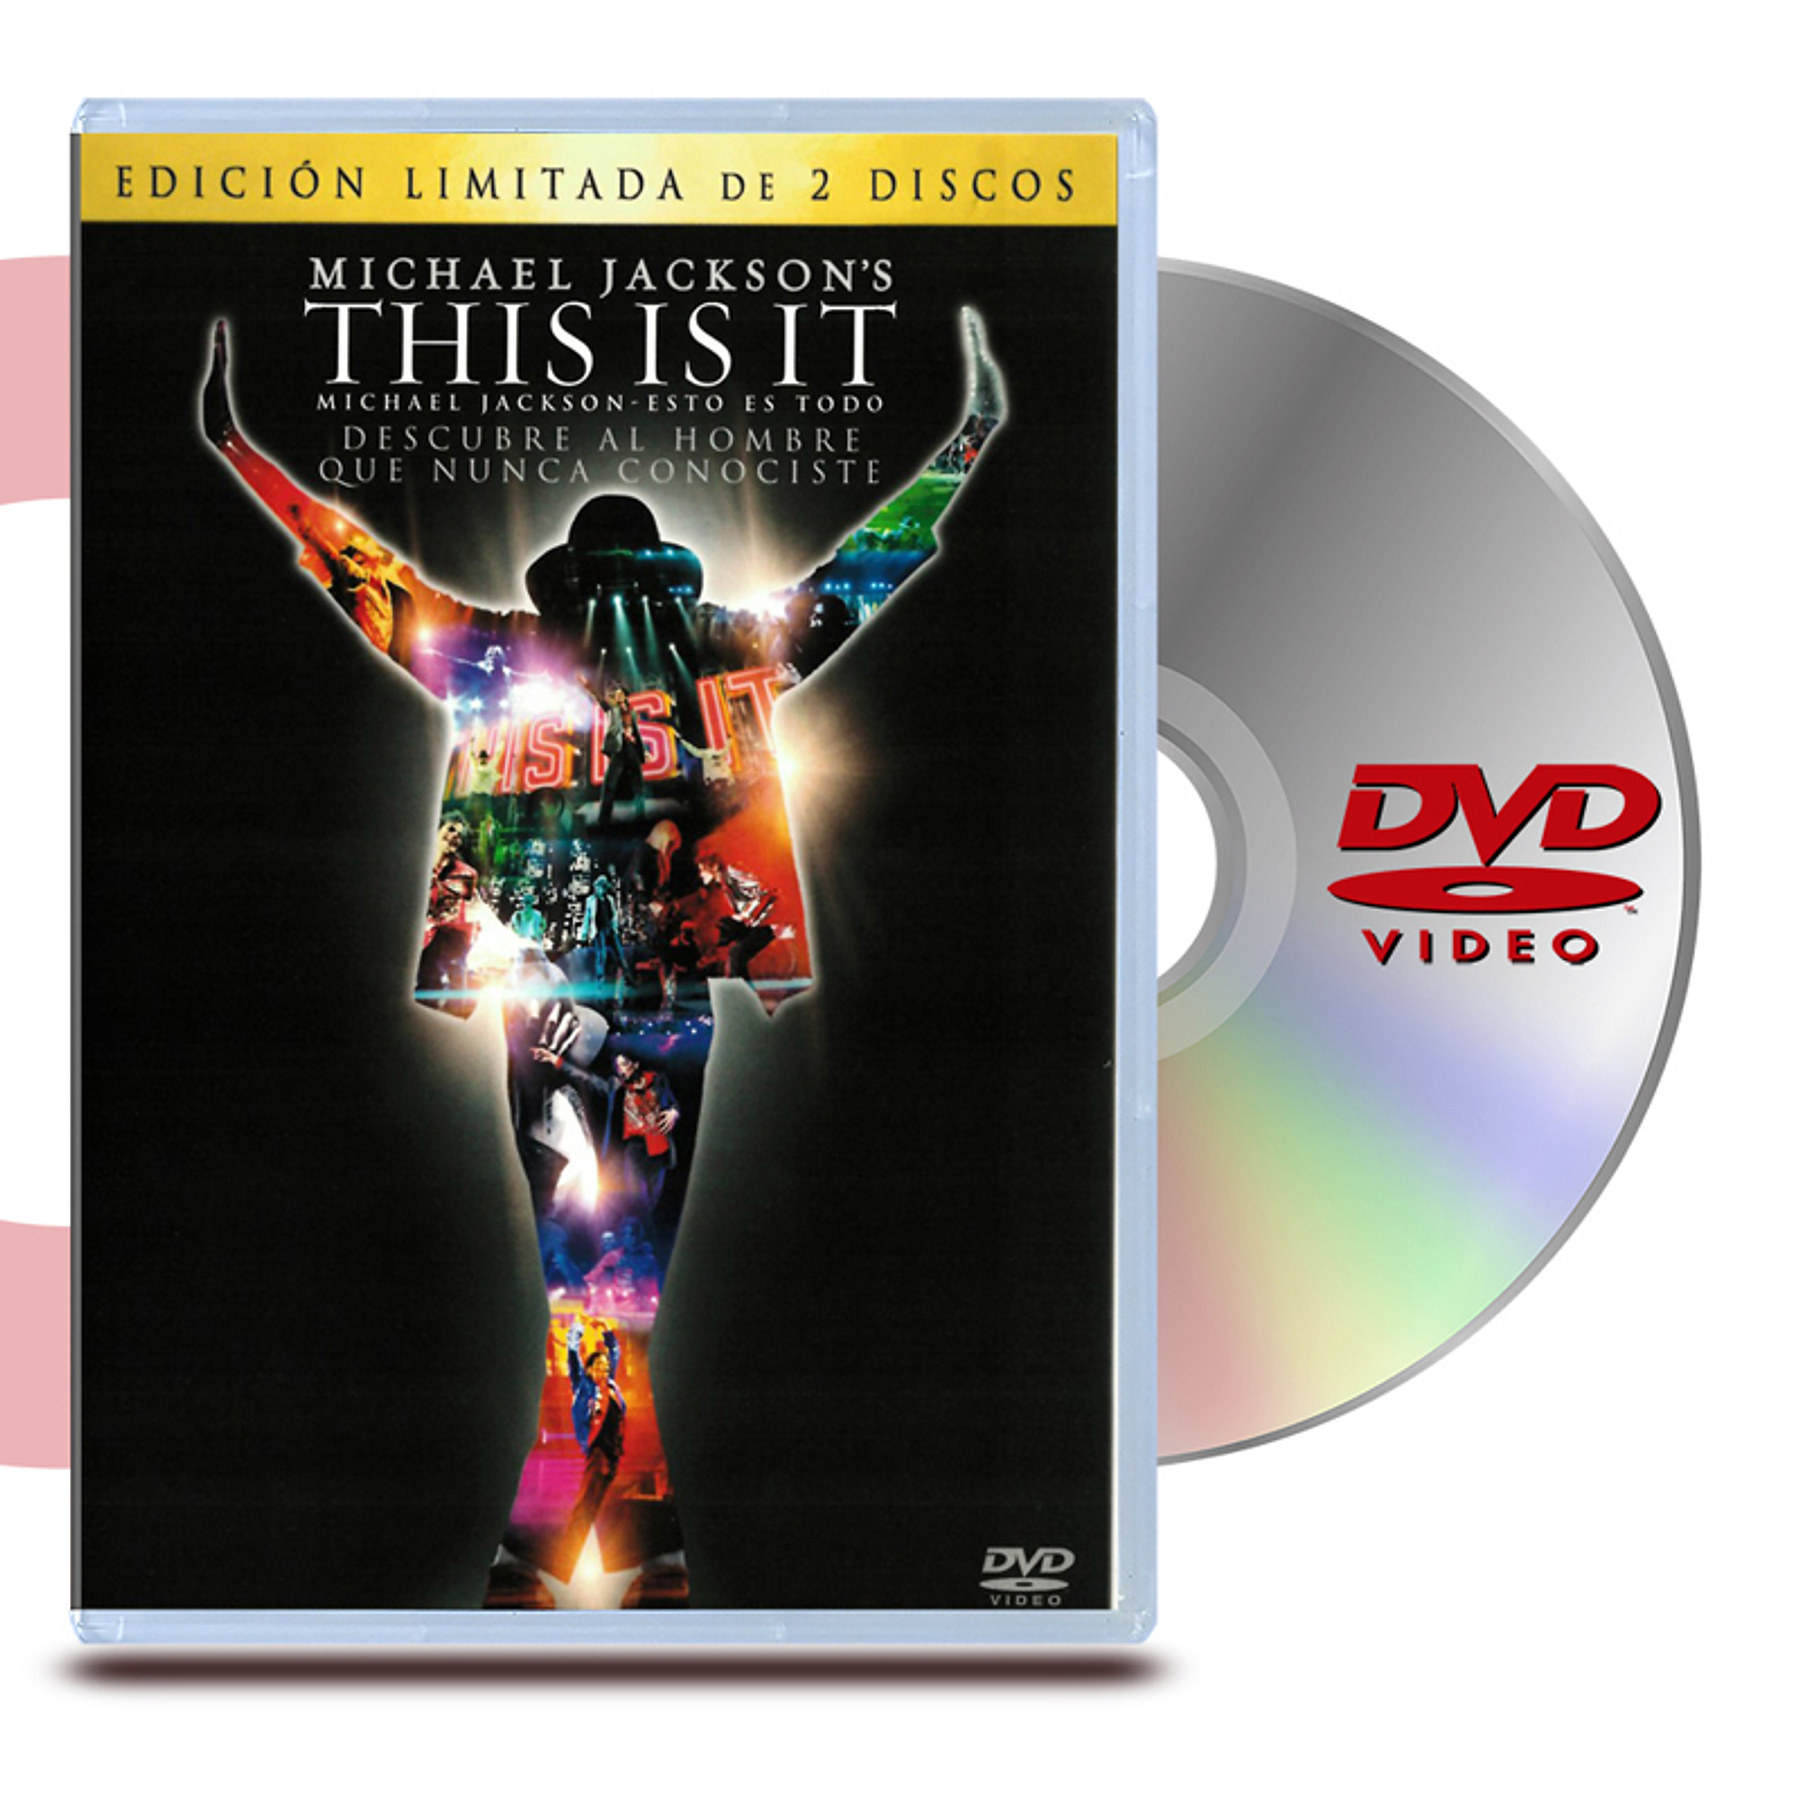 DVD THIS IS IT: 2 DISCOS